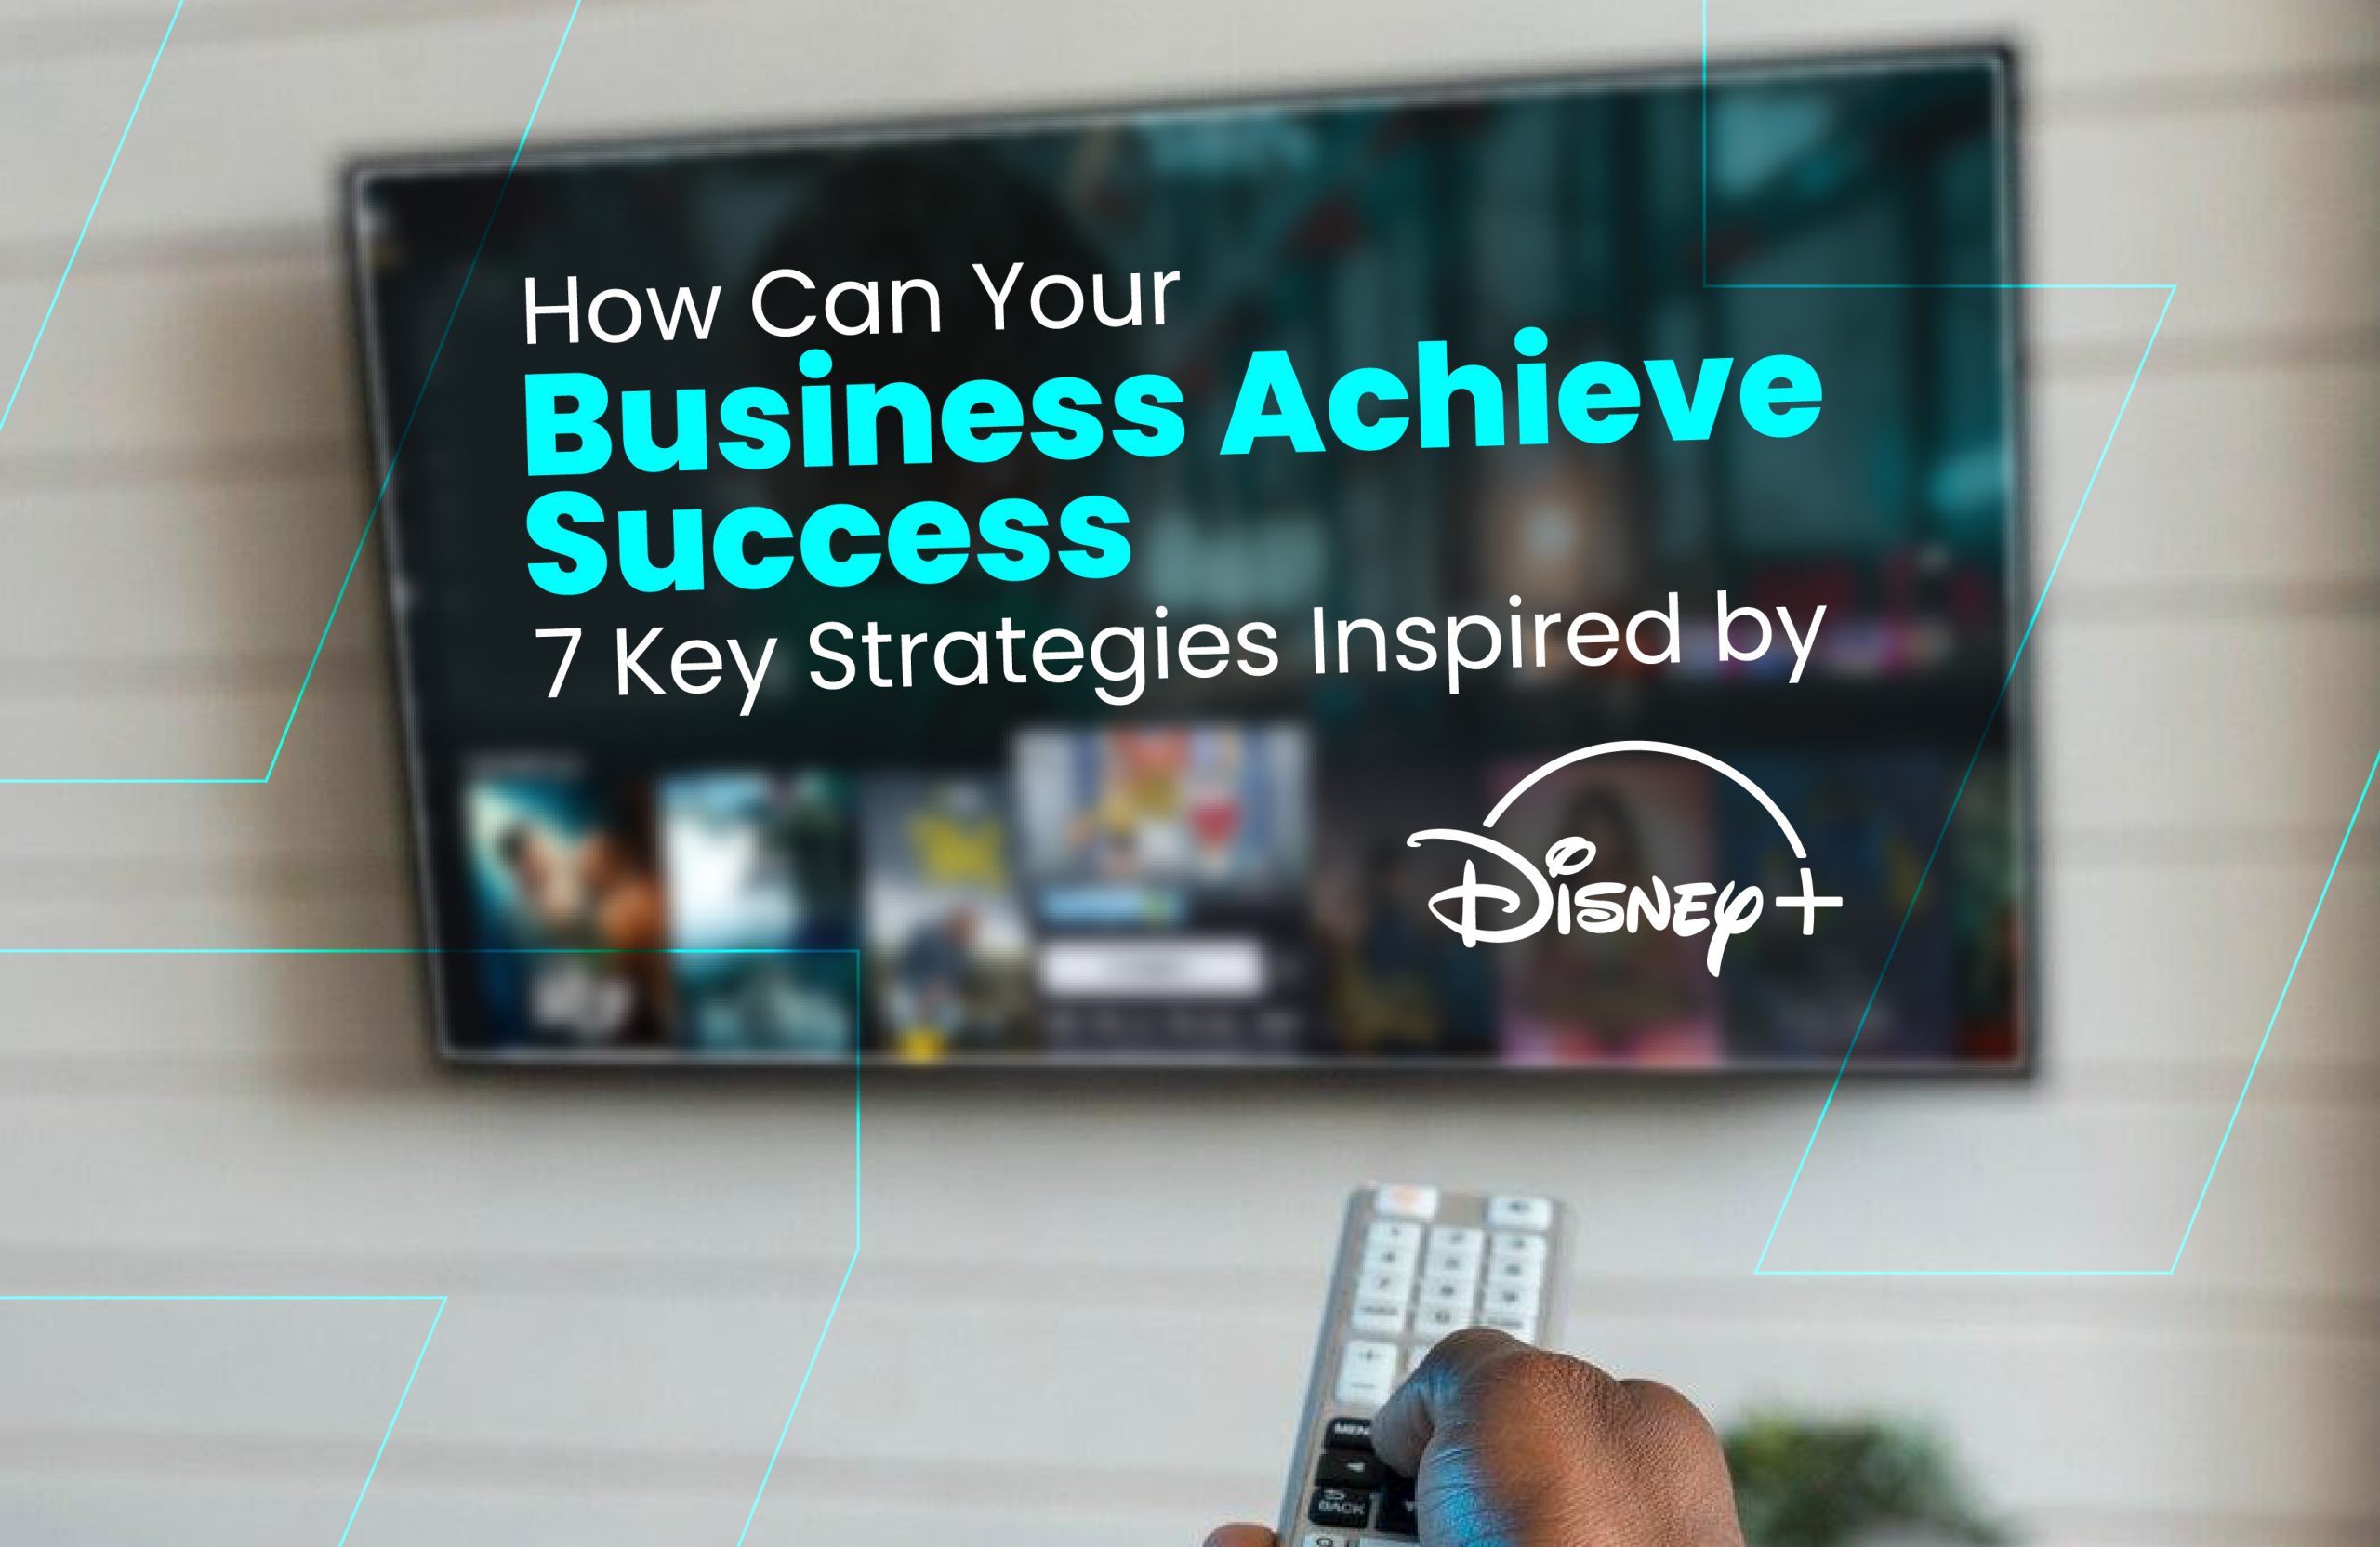 How Can Your Business Achieve Success : Inspired by Disney Plus Deals?